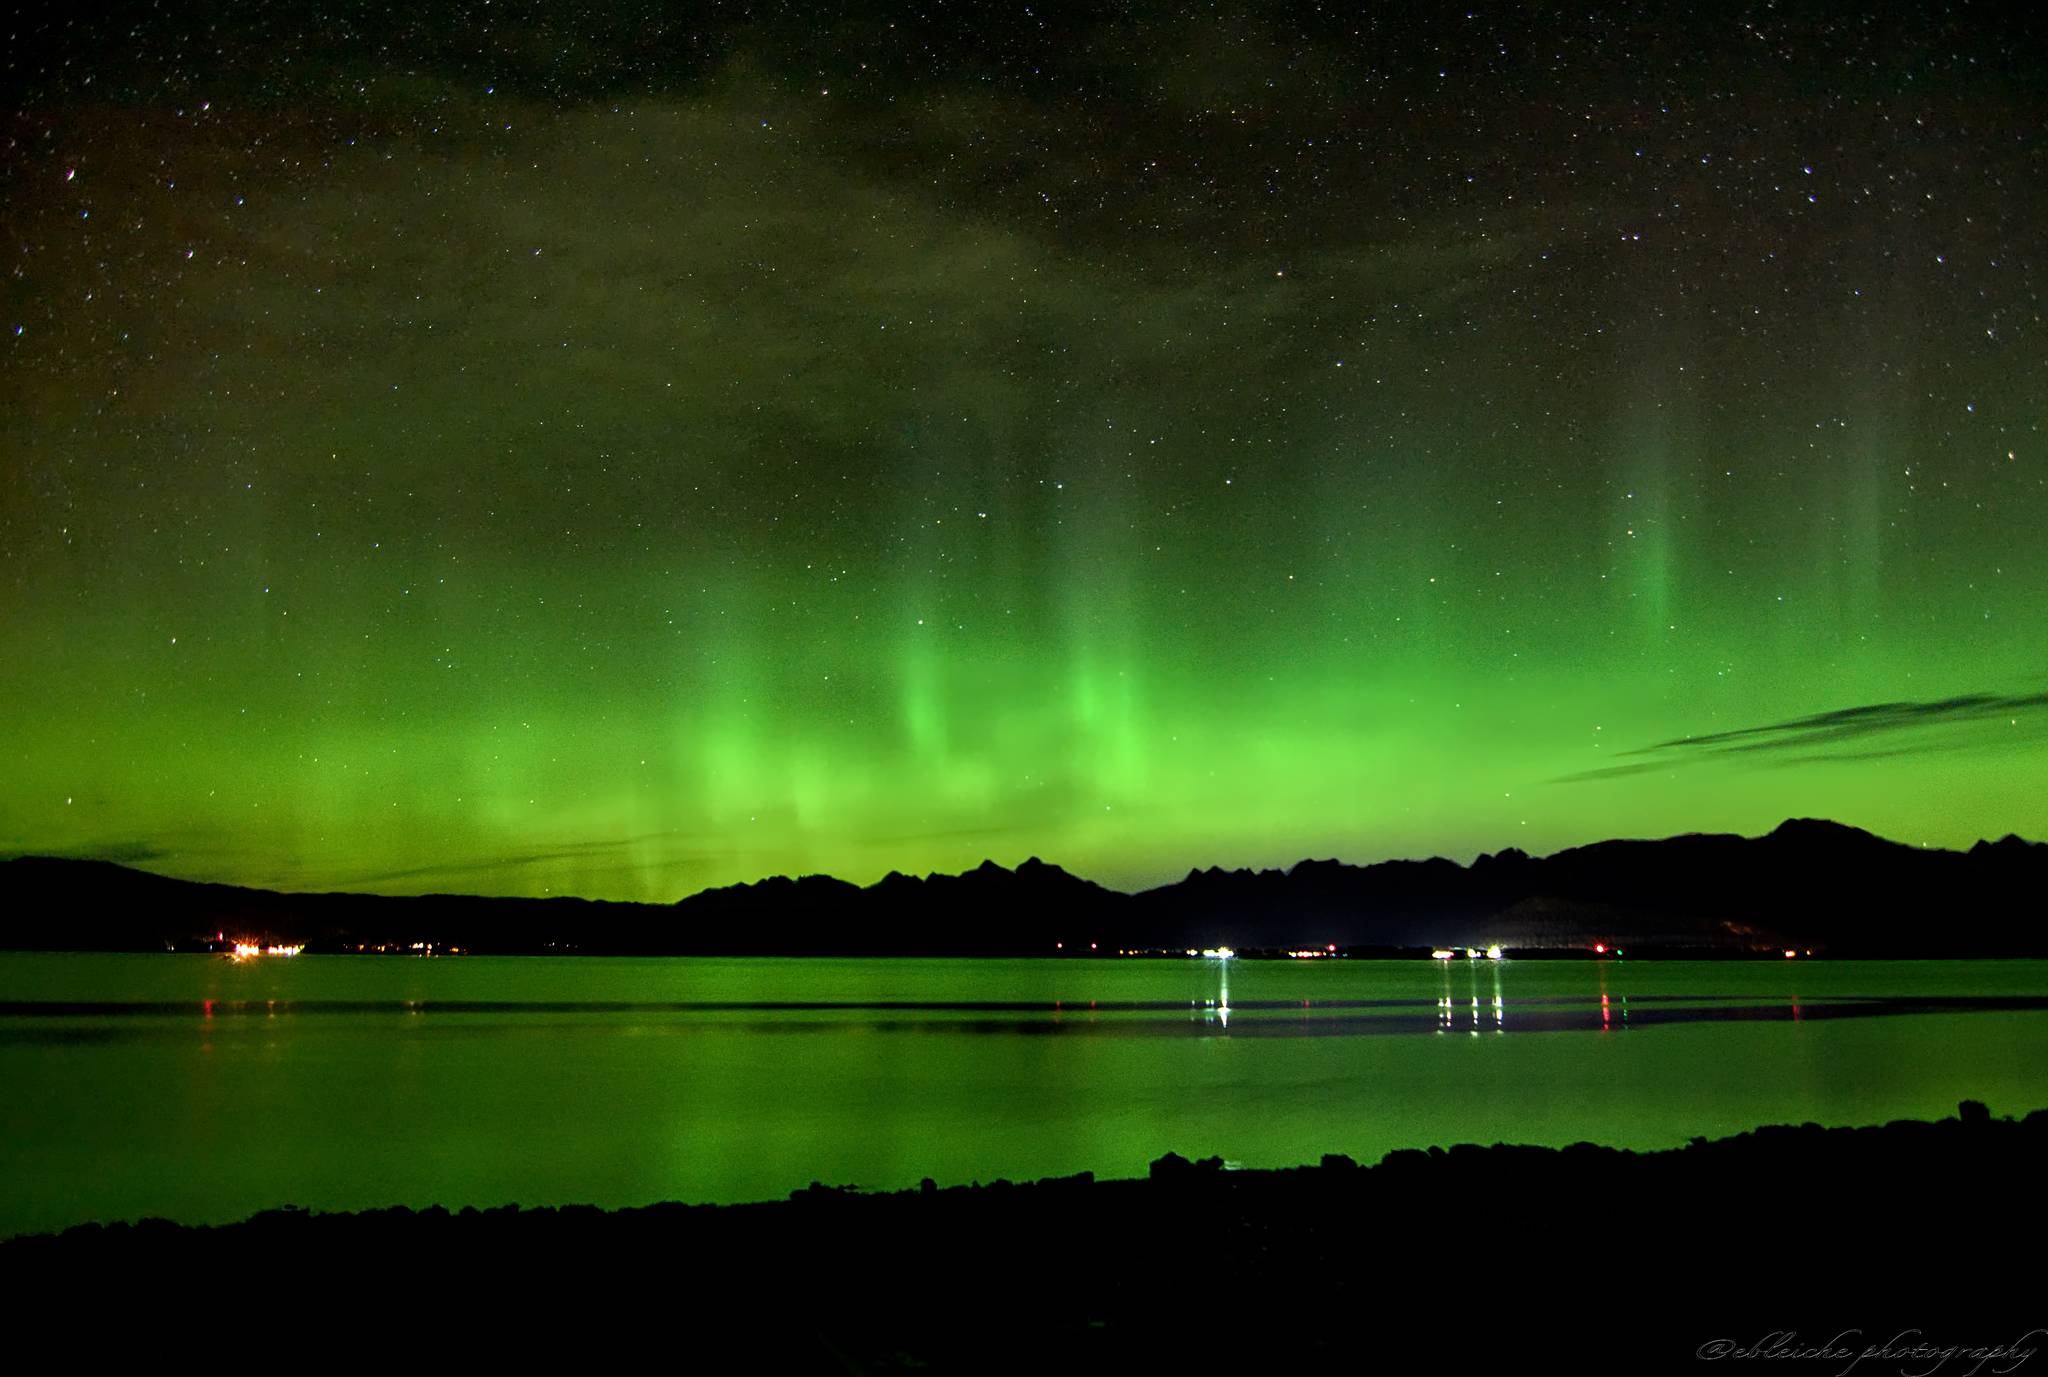 A view of the auroras from our most recent geomagnetic storm, shot from North Douglas on Friday, Oct. 23. (Courtesy Photo / Eric Bleicher)